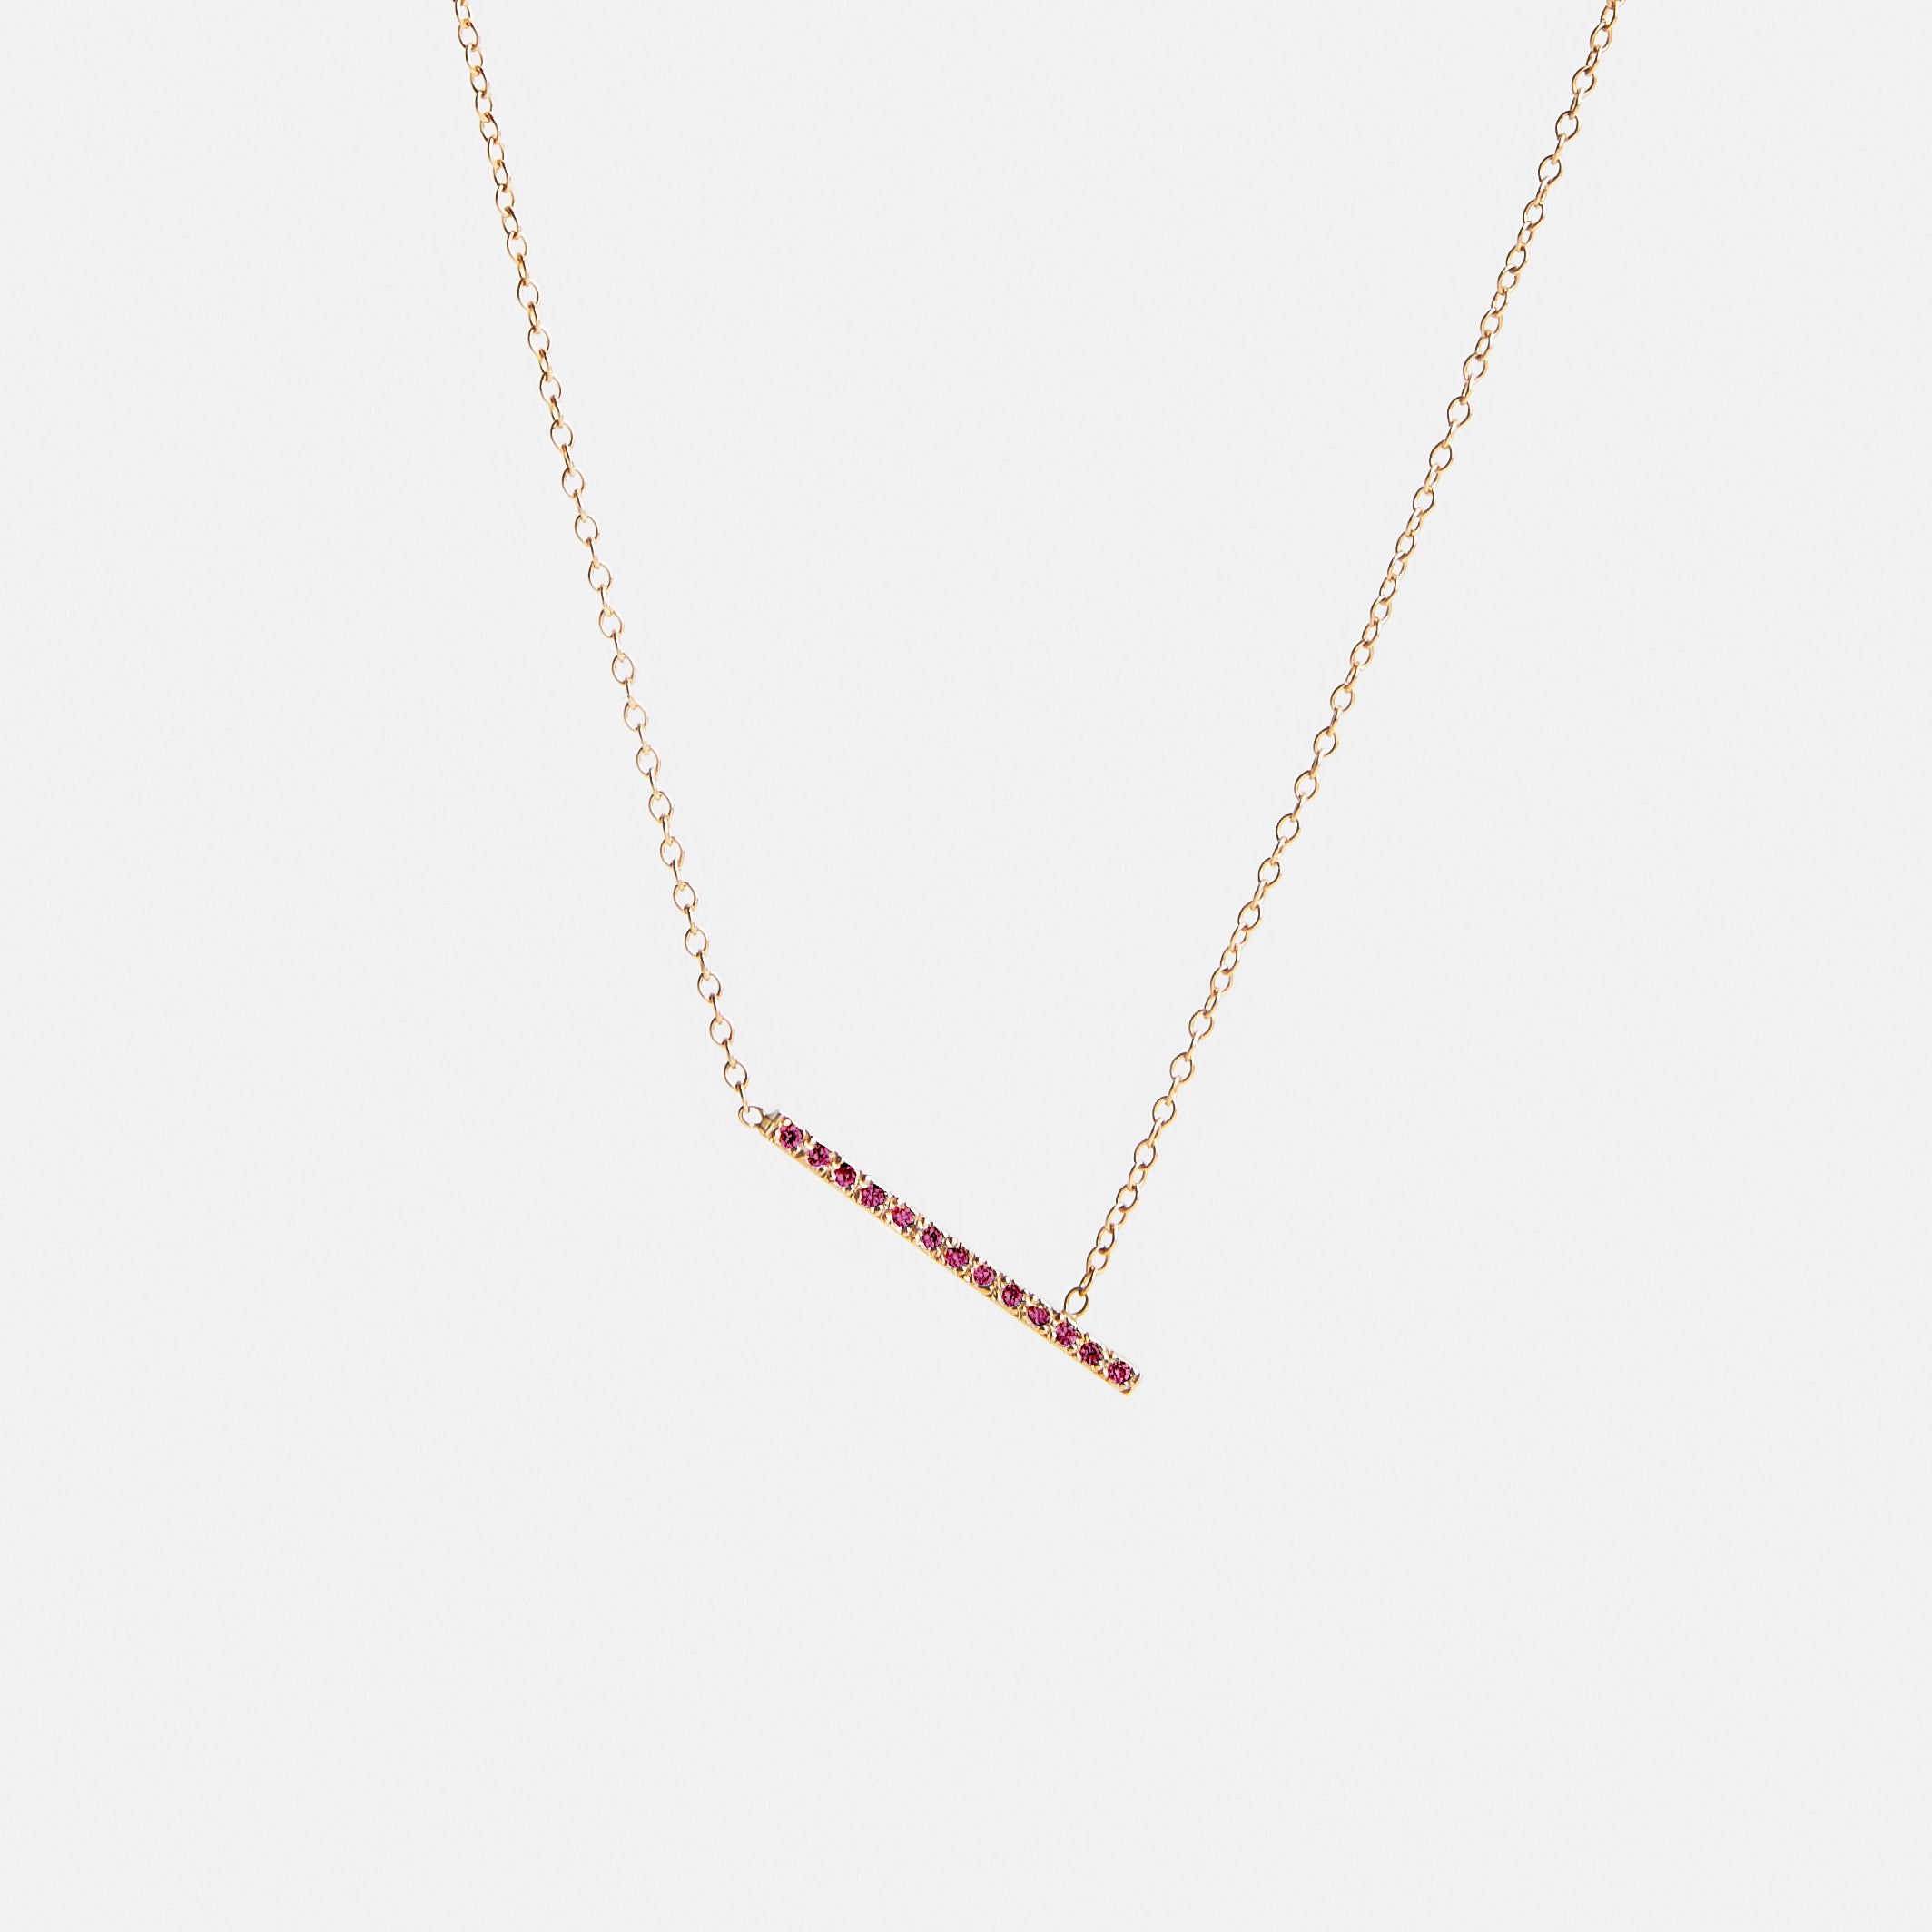 Tira Designer Necklace in 14k Gold set with Rubies By SHW Fine Jewelry NYC